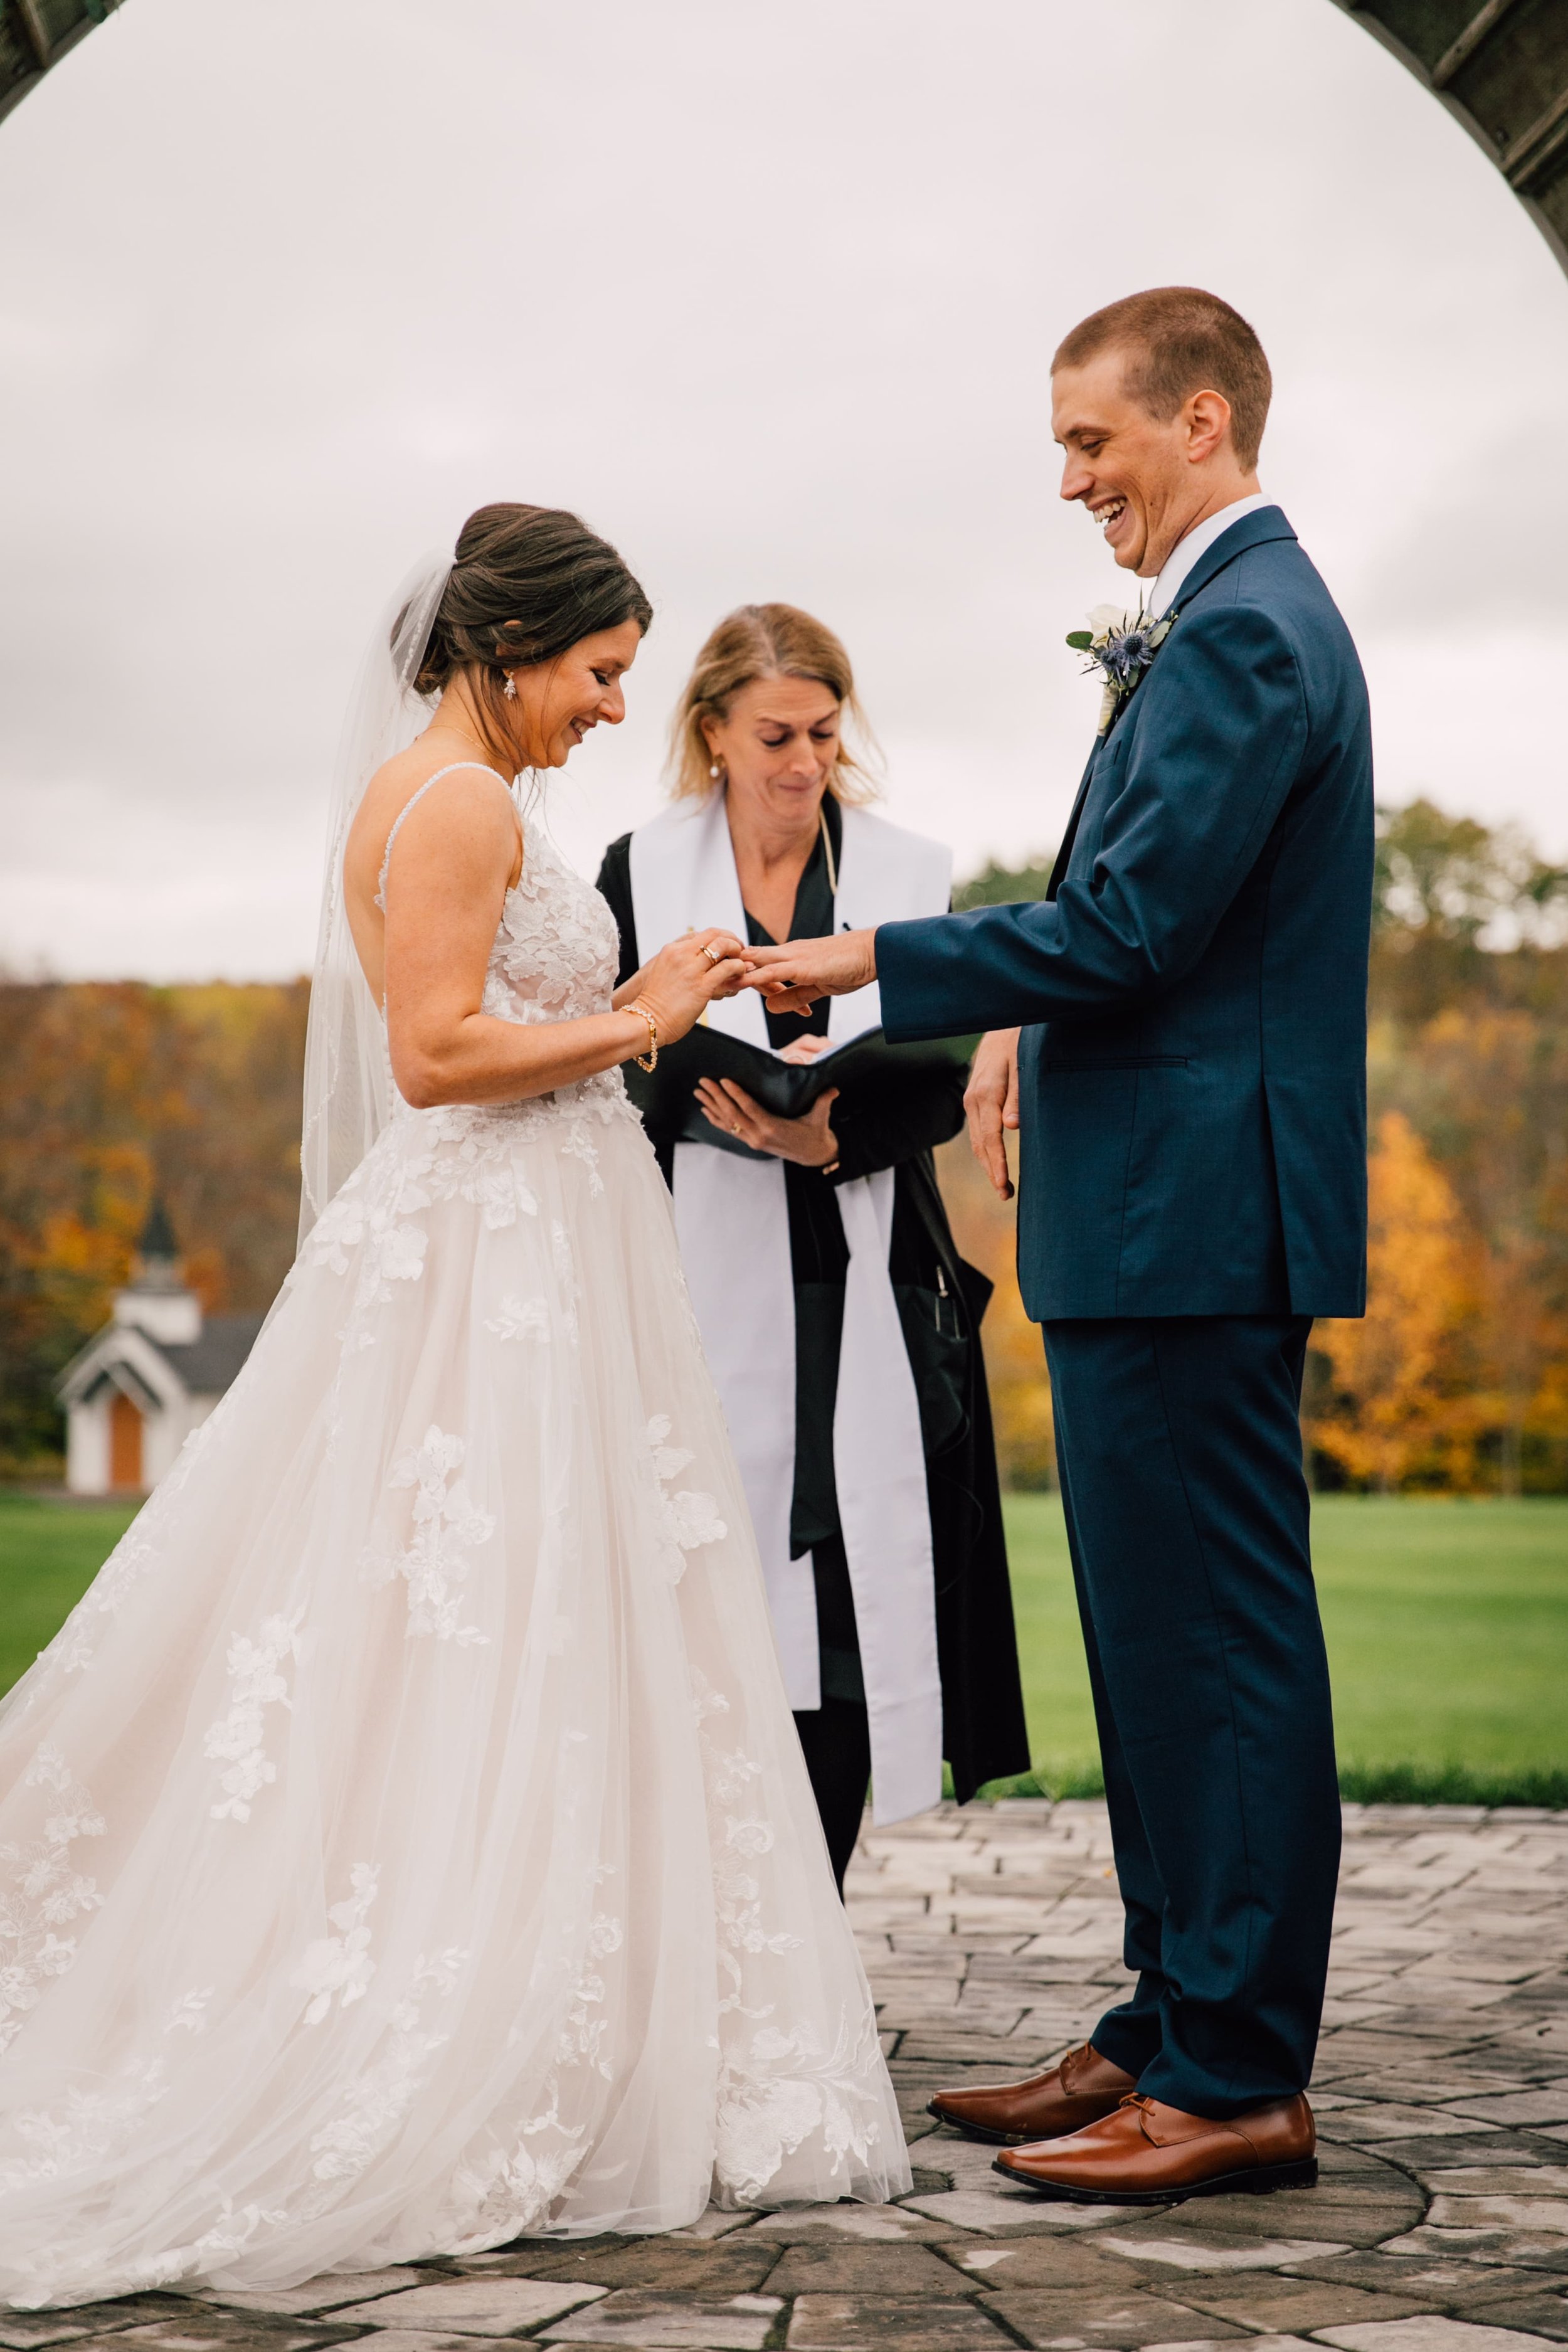  the bride puts the grooms ring on his finger during their outdoor fall wedding ceremony 